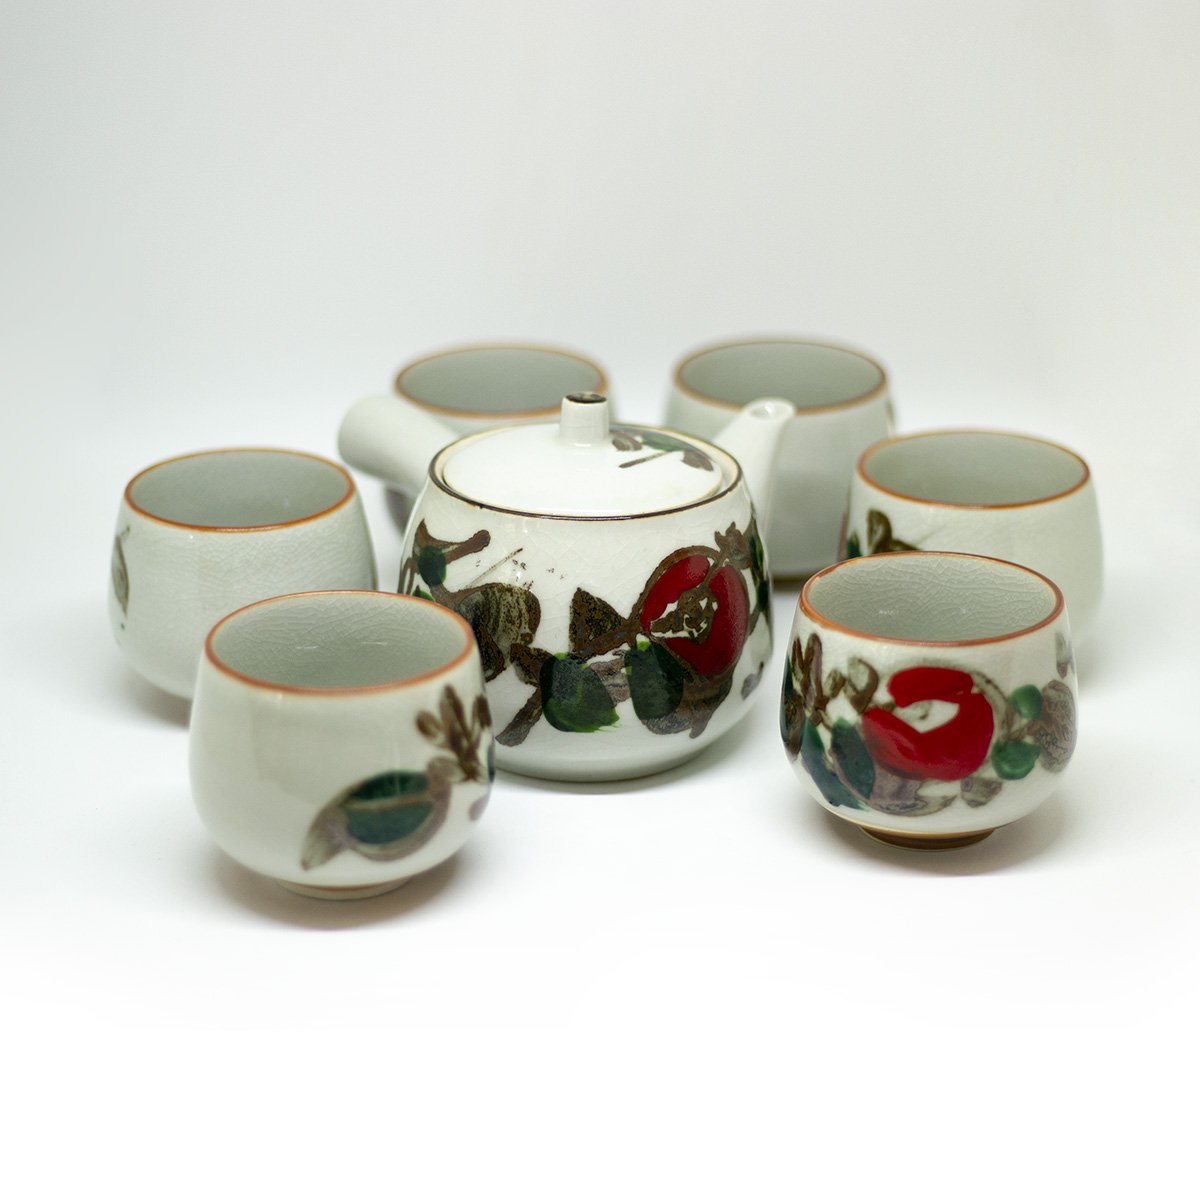 yesterday tea drinking set with hand painted flowers - een stip